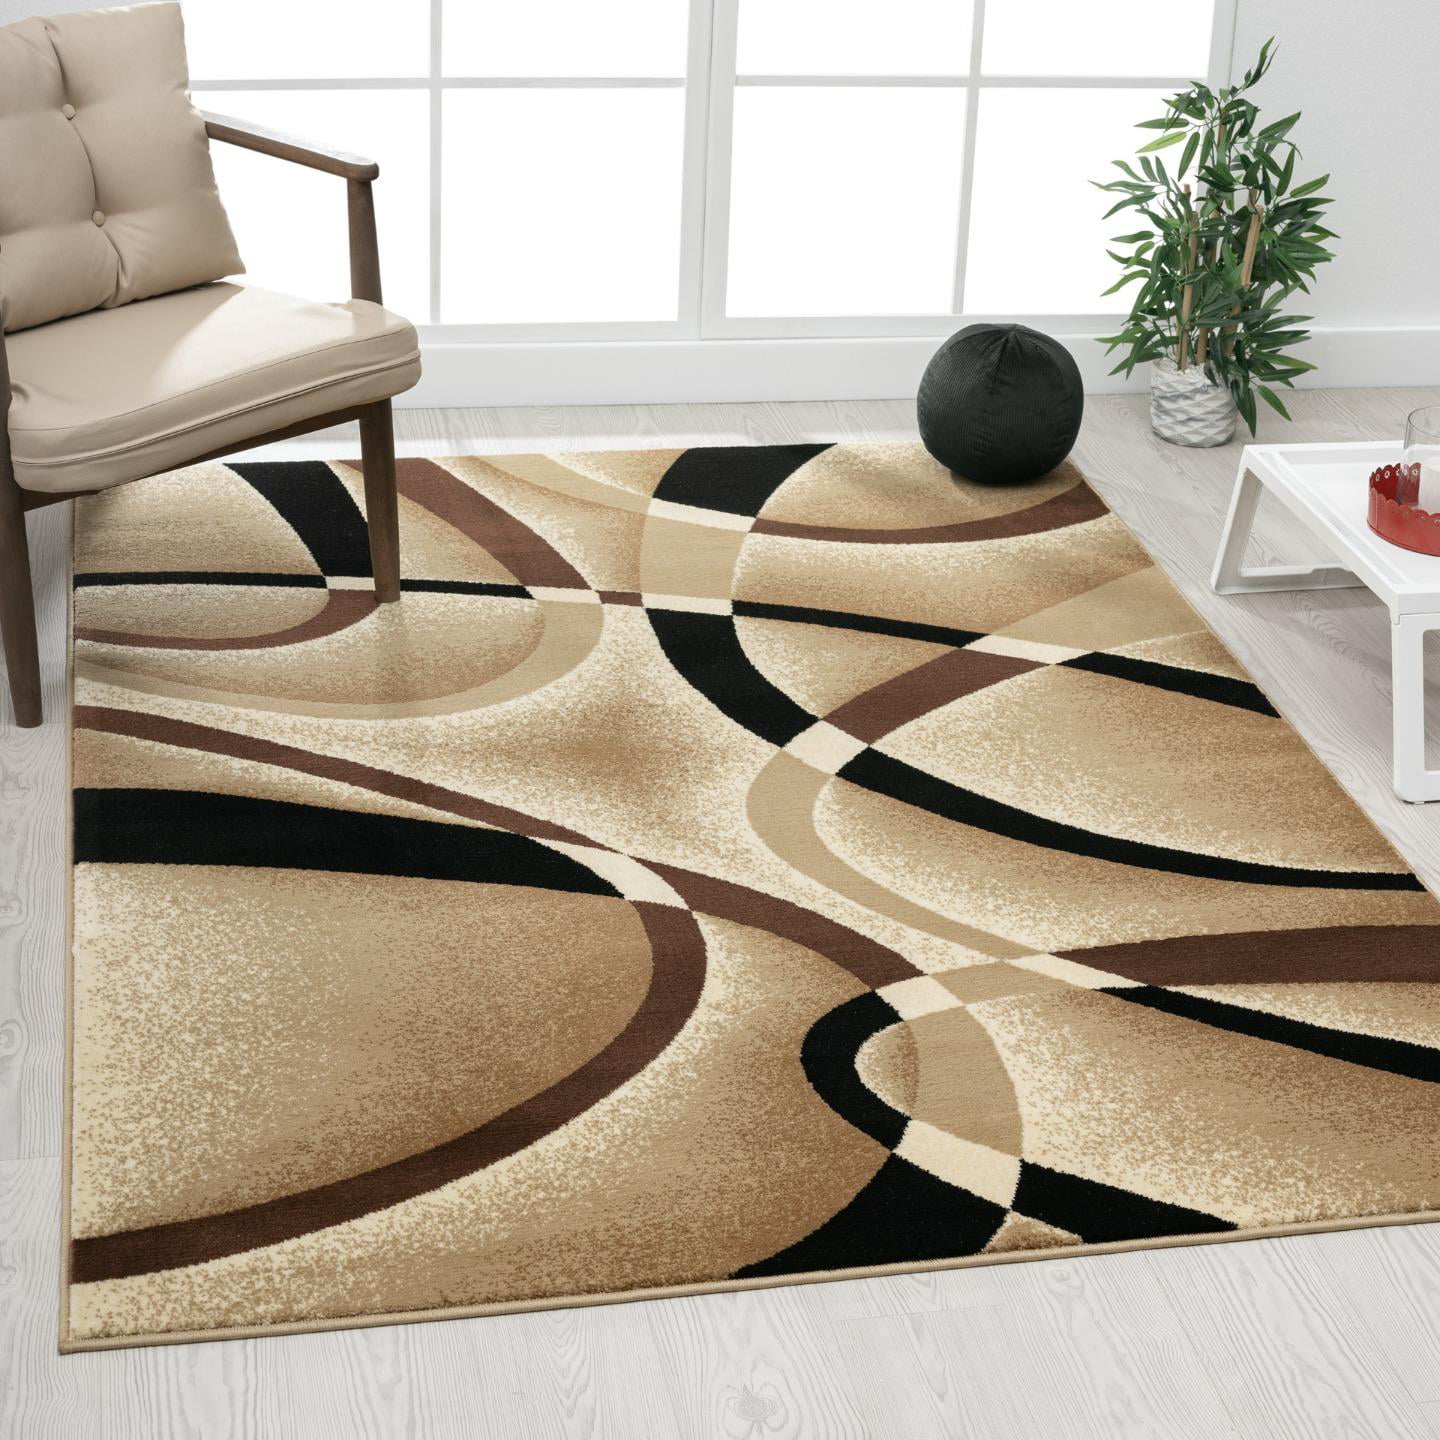 Abstract Rug Modern Black Grey Red Contour Cut Carpet Small Large Room Floor Mat 